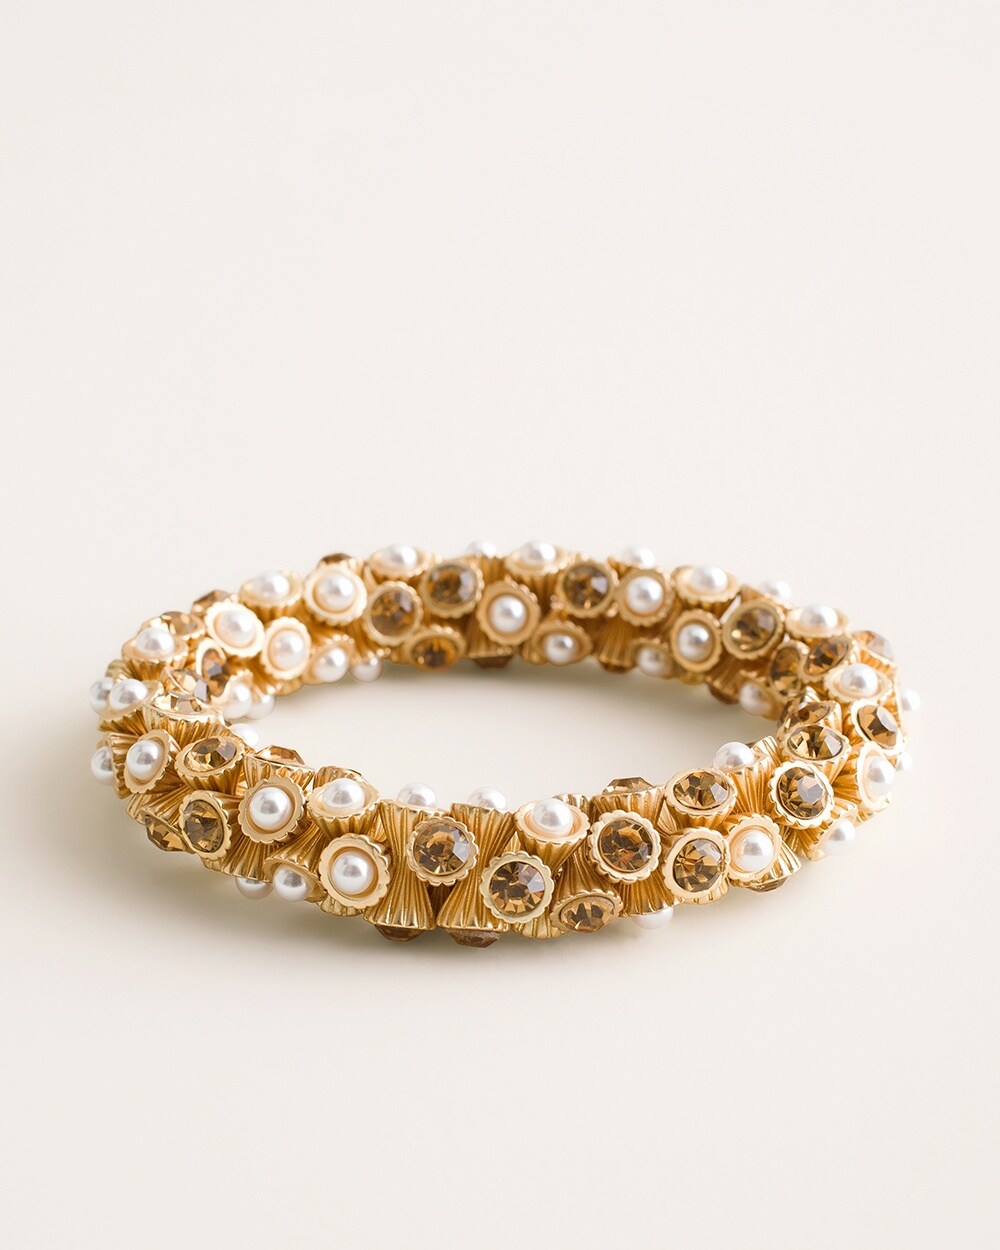 Faux-Pearl and Goldtone Stretch Bracelet